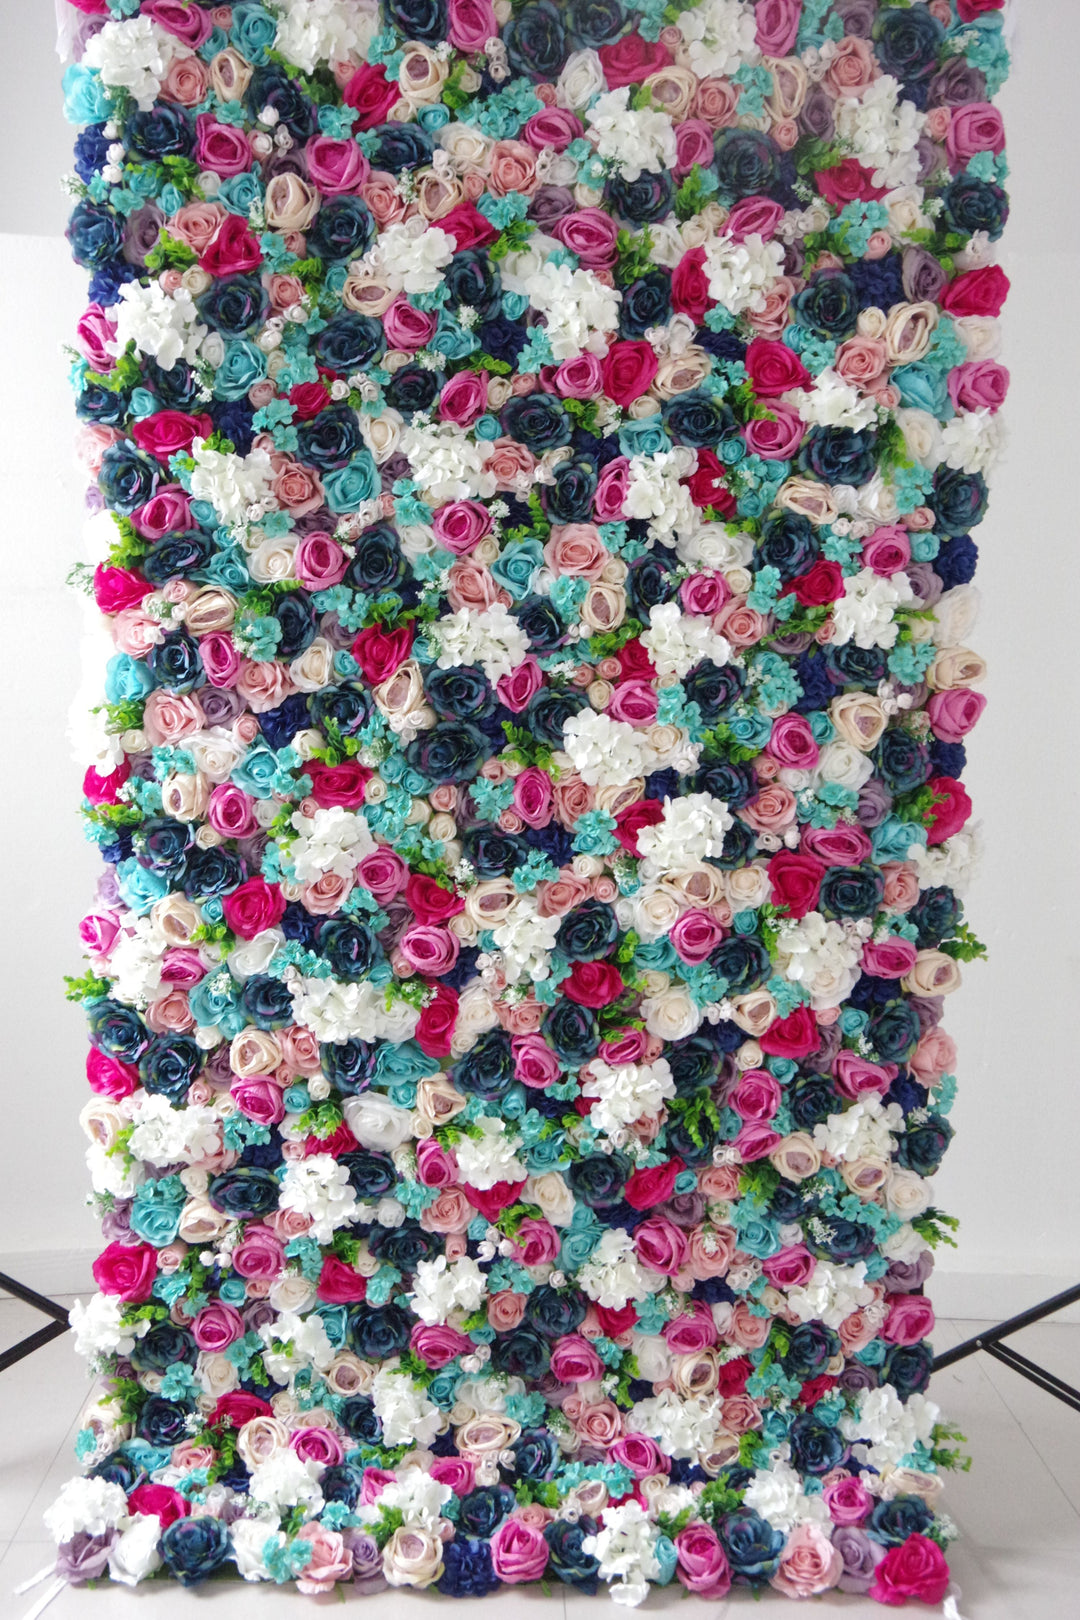 Mixed Colors Of Roses And Hydrangeas, Artificial Flower Wall, Wedding Party Backdrop